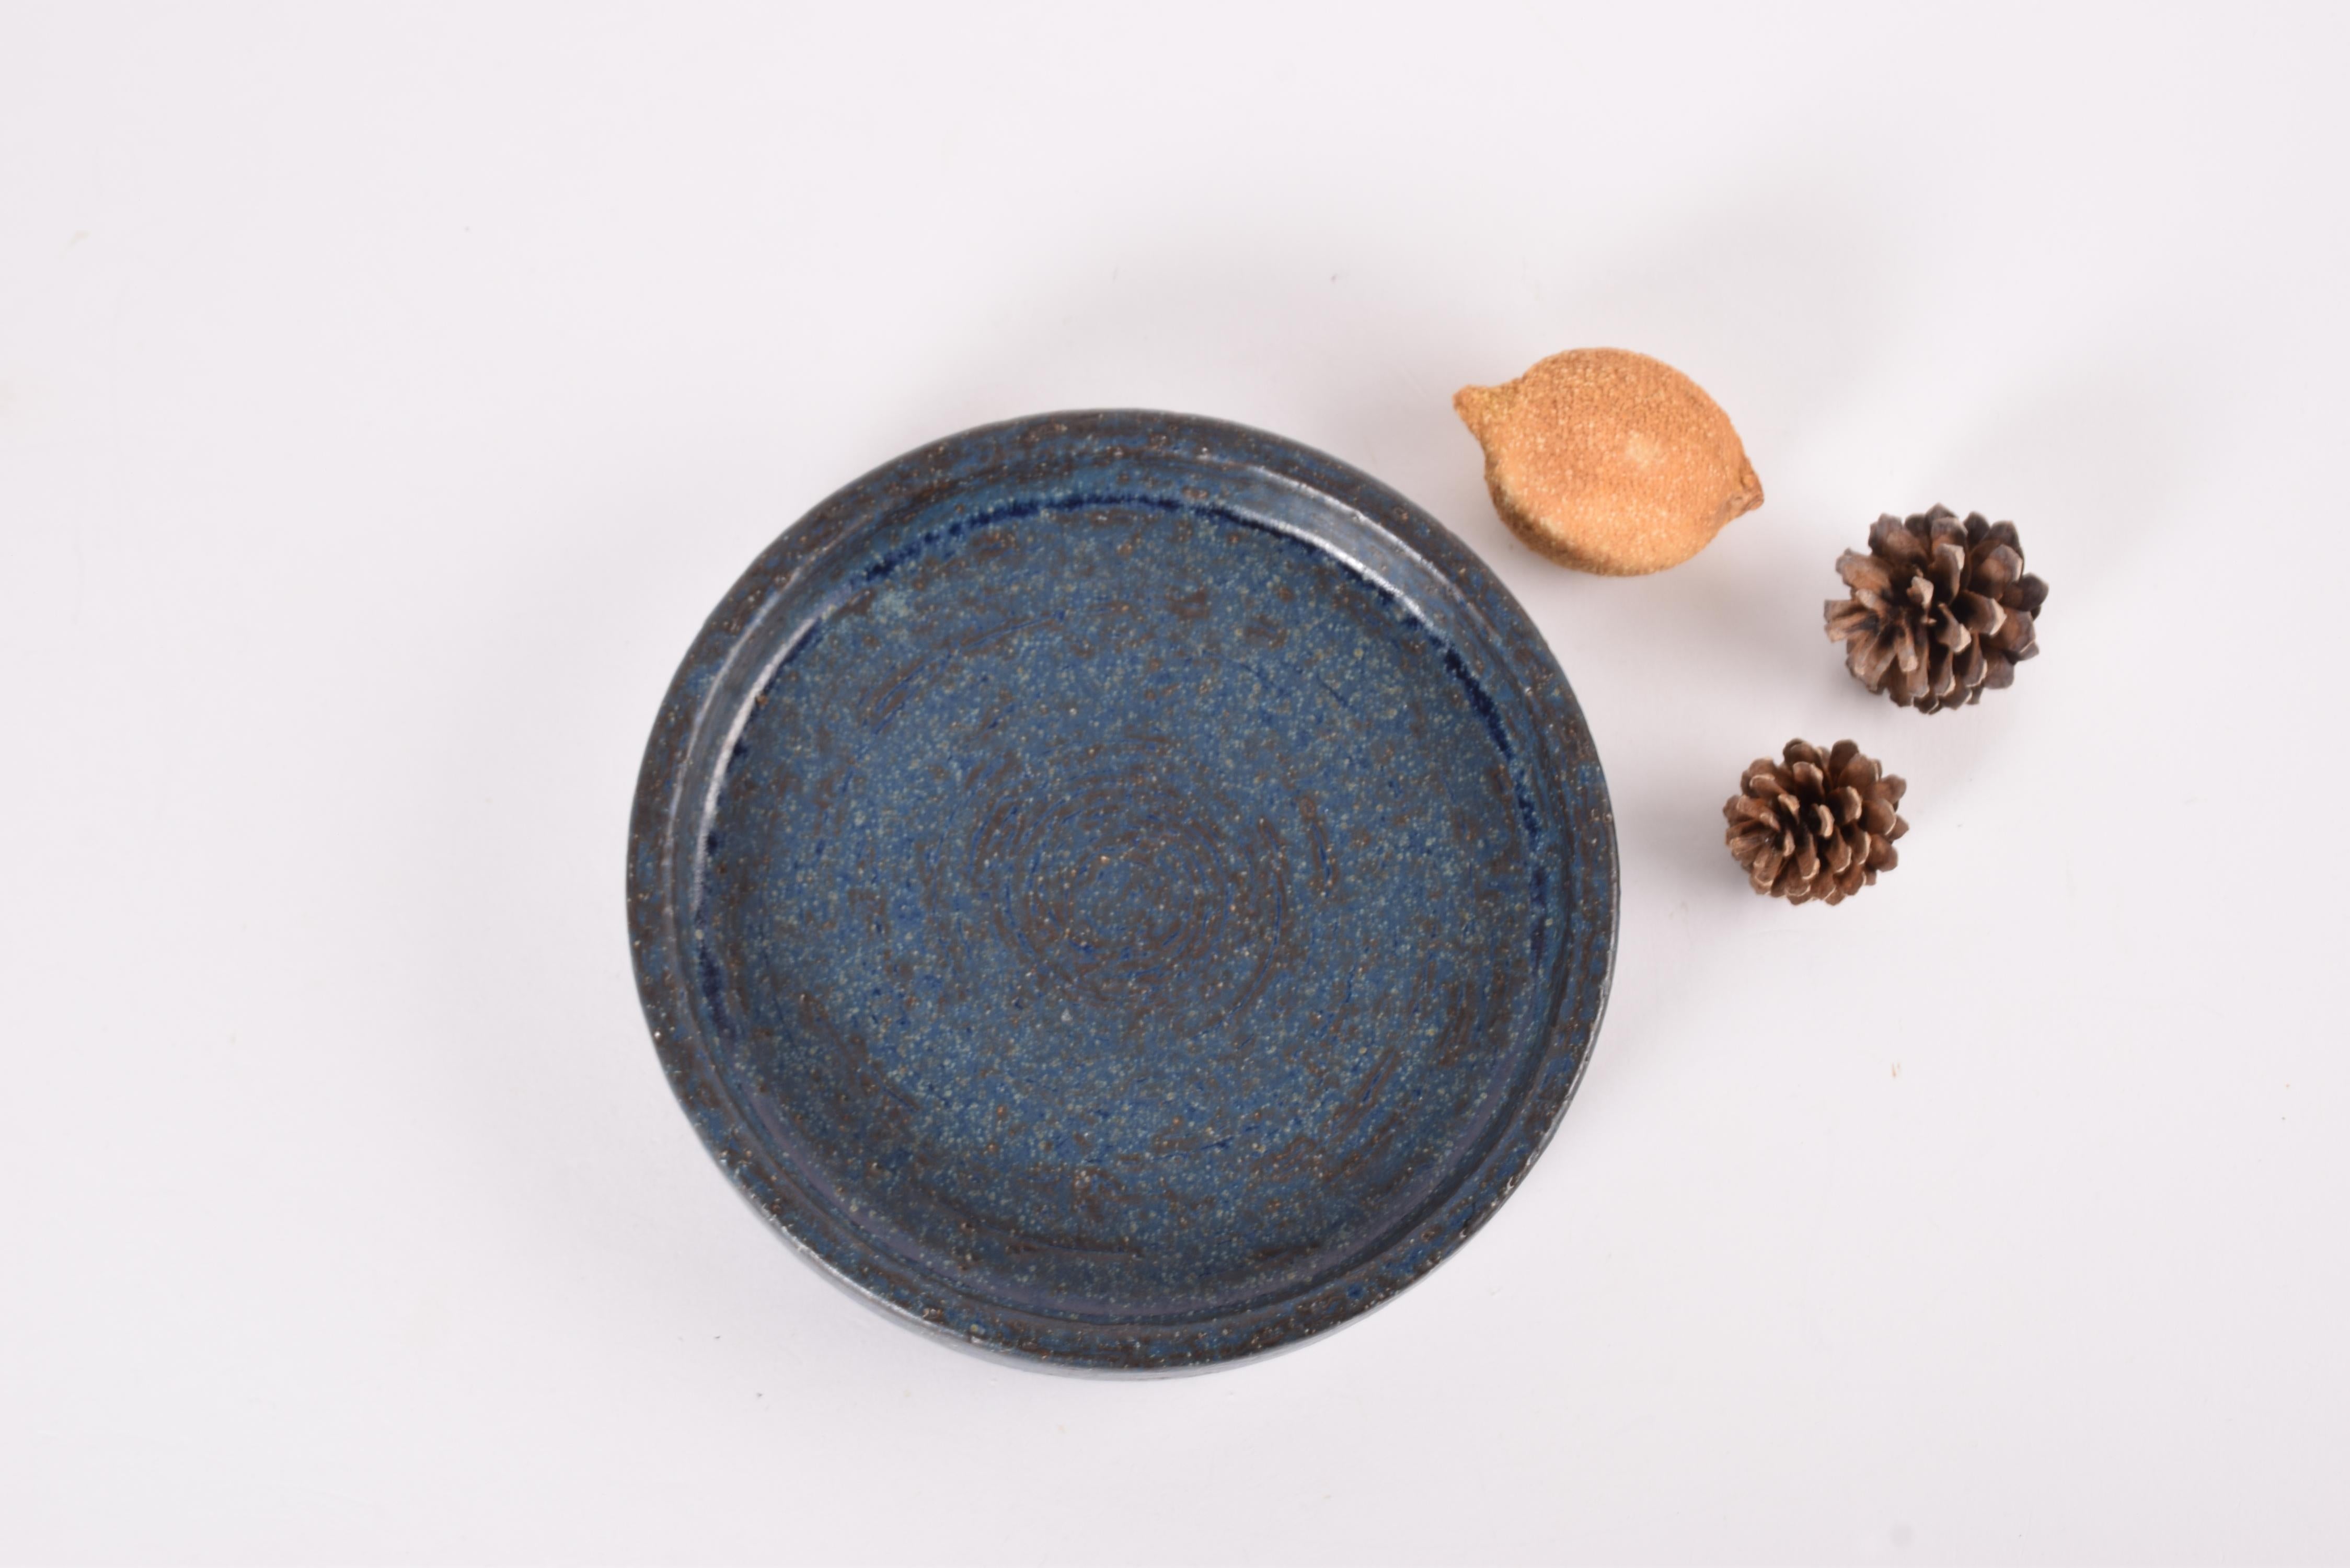 Low ceramic bowl by the acknowledged Danish ceramic workshop Palshus. It is designed by Per Linnemann-Schmidtand made in the 1960s or early 1970s.

The bowl is made from chamotte clay and has an interesting dark blue glaze with brown elements and